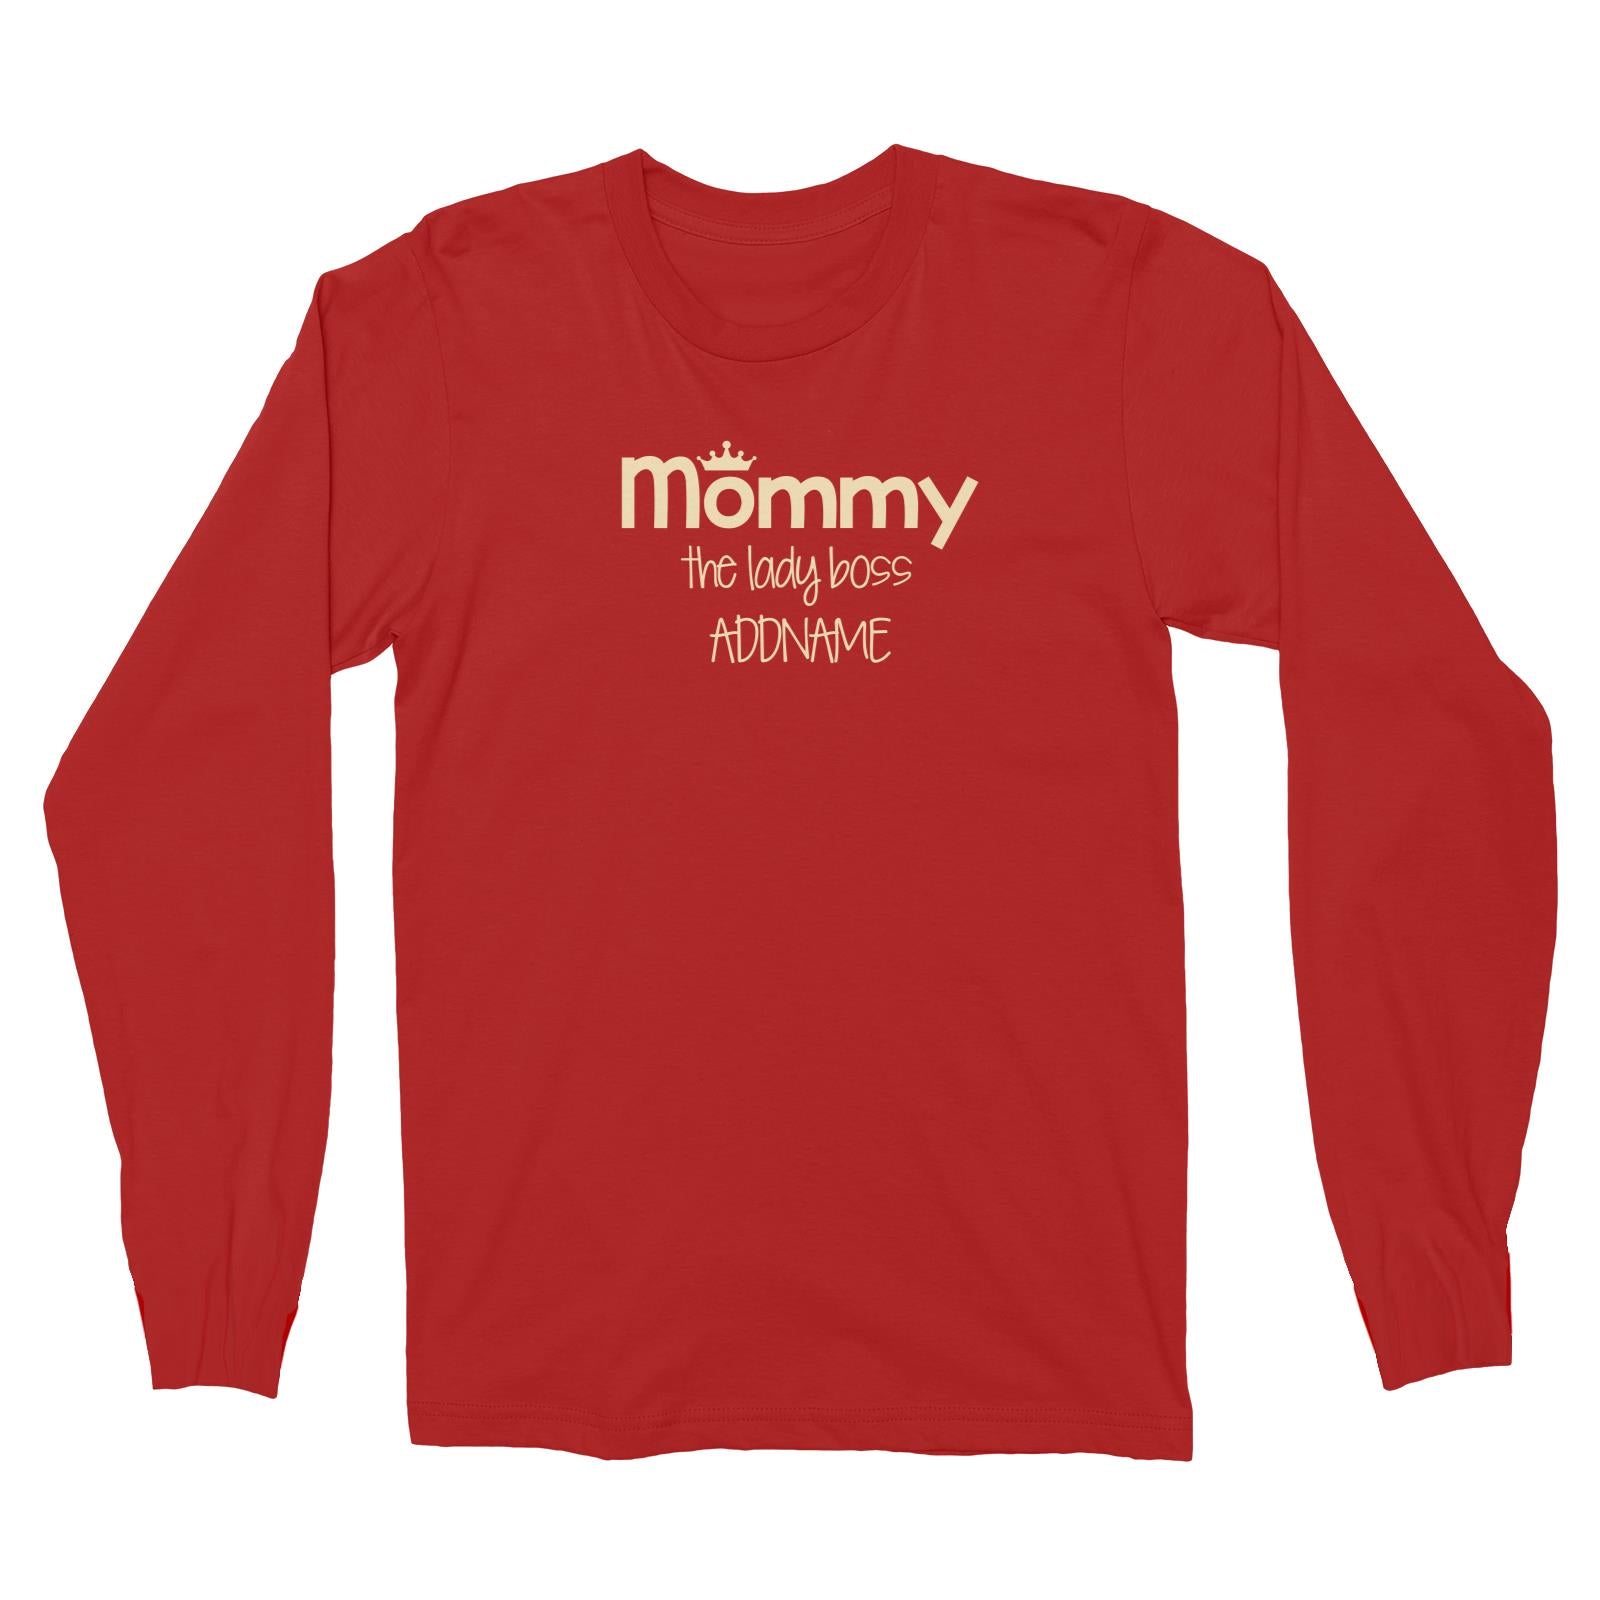 Mommy with Tiara The Lady Boss Long Sleeve Unisex T-Shirt